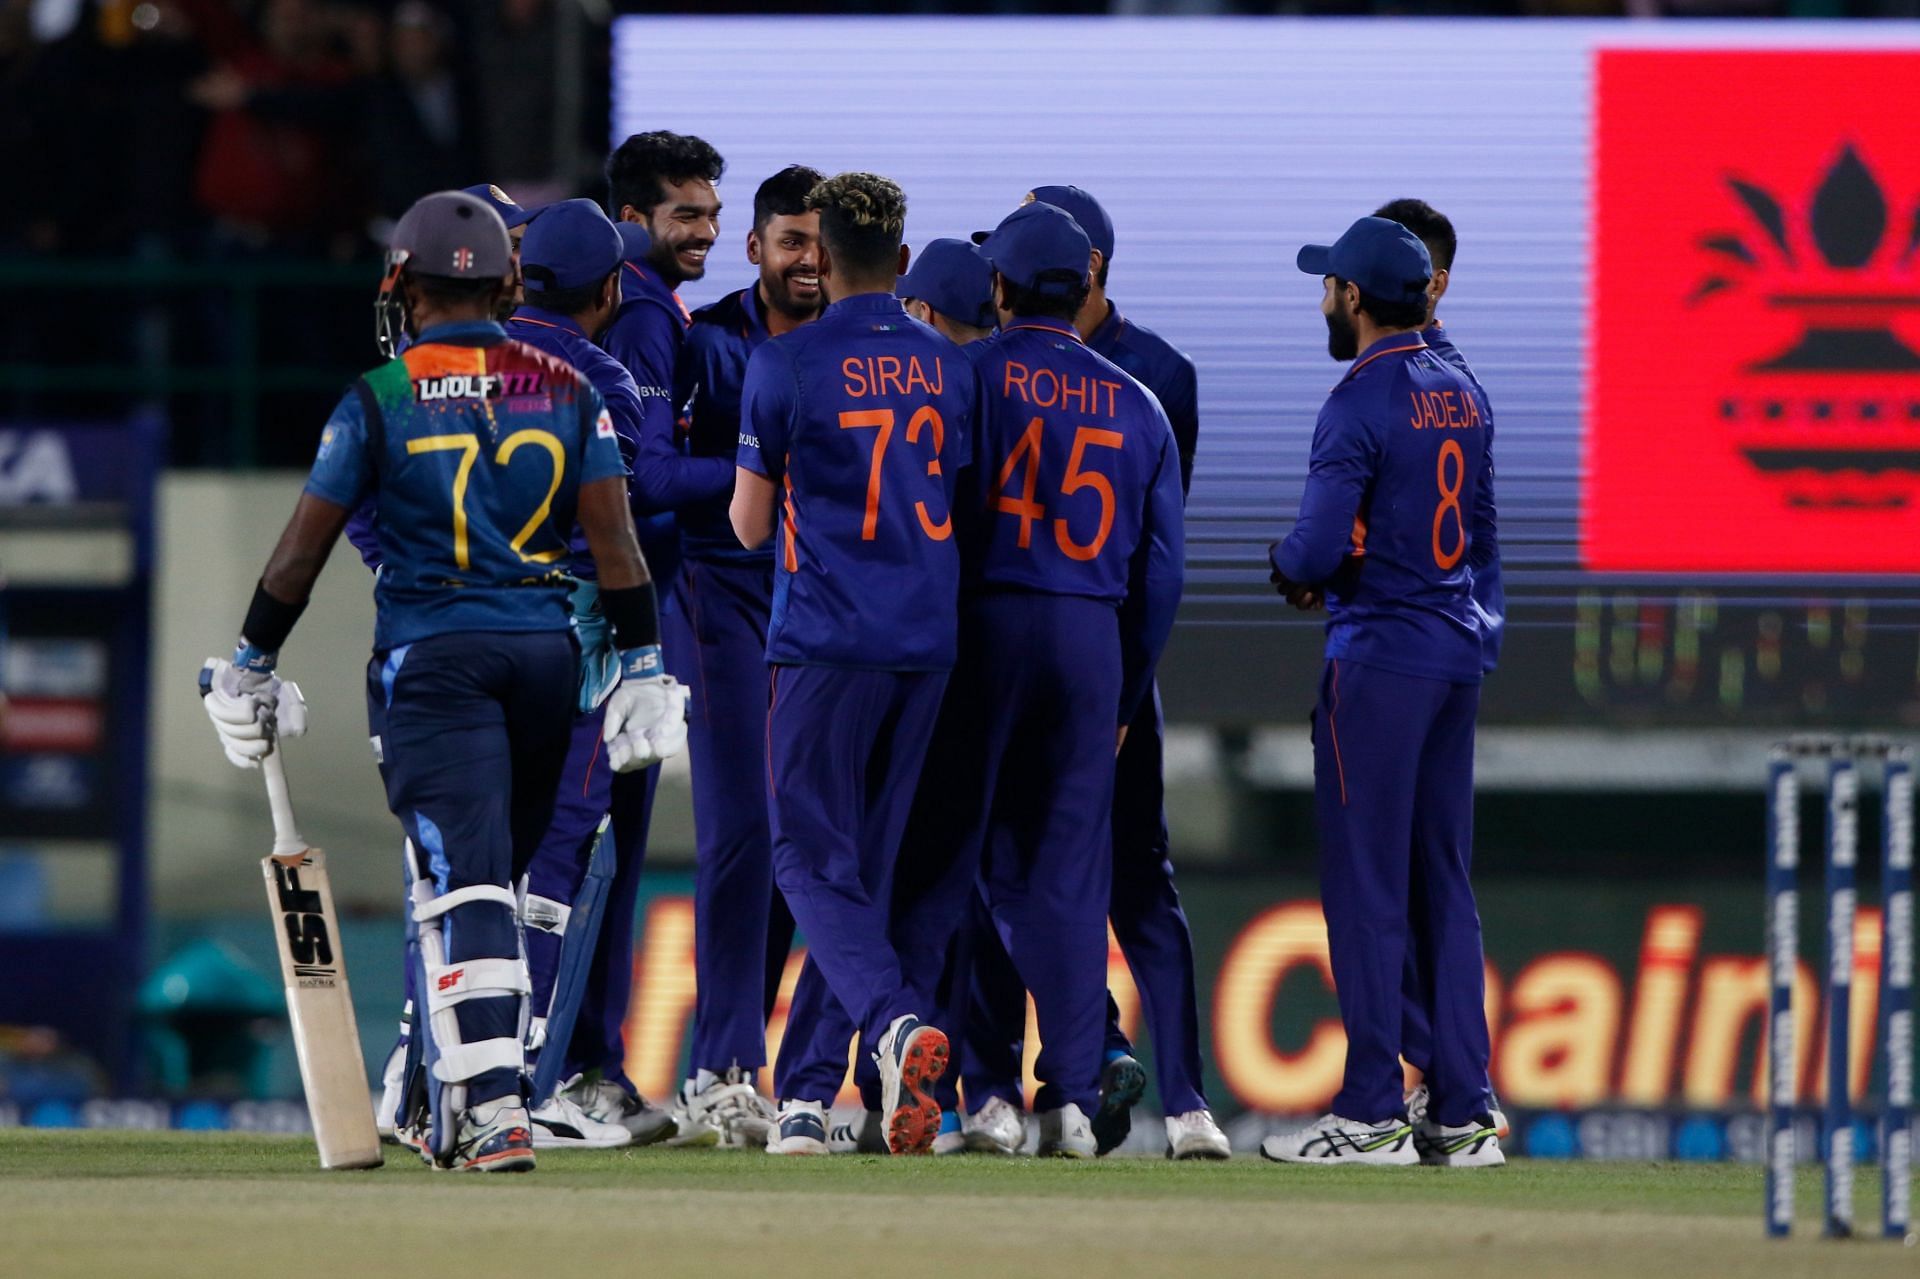 Enter caption Enter caption Enter caption The India vs Sri Lanka series ended in a 3-0 whitewash win for the hosts